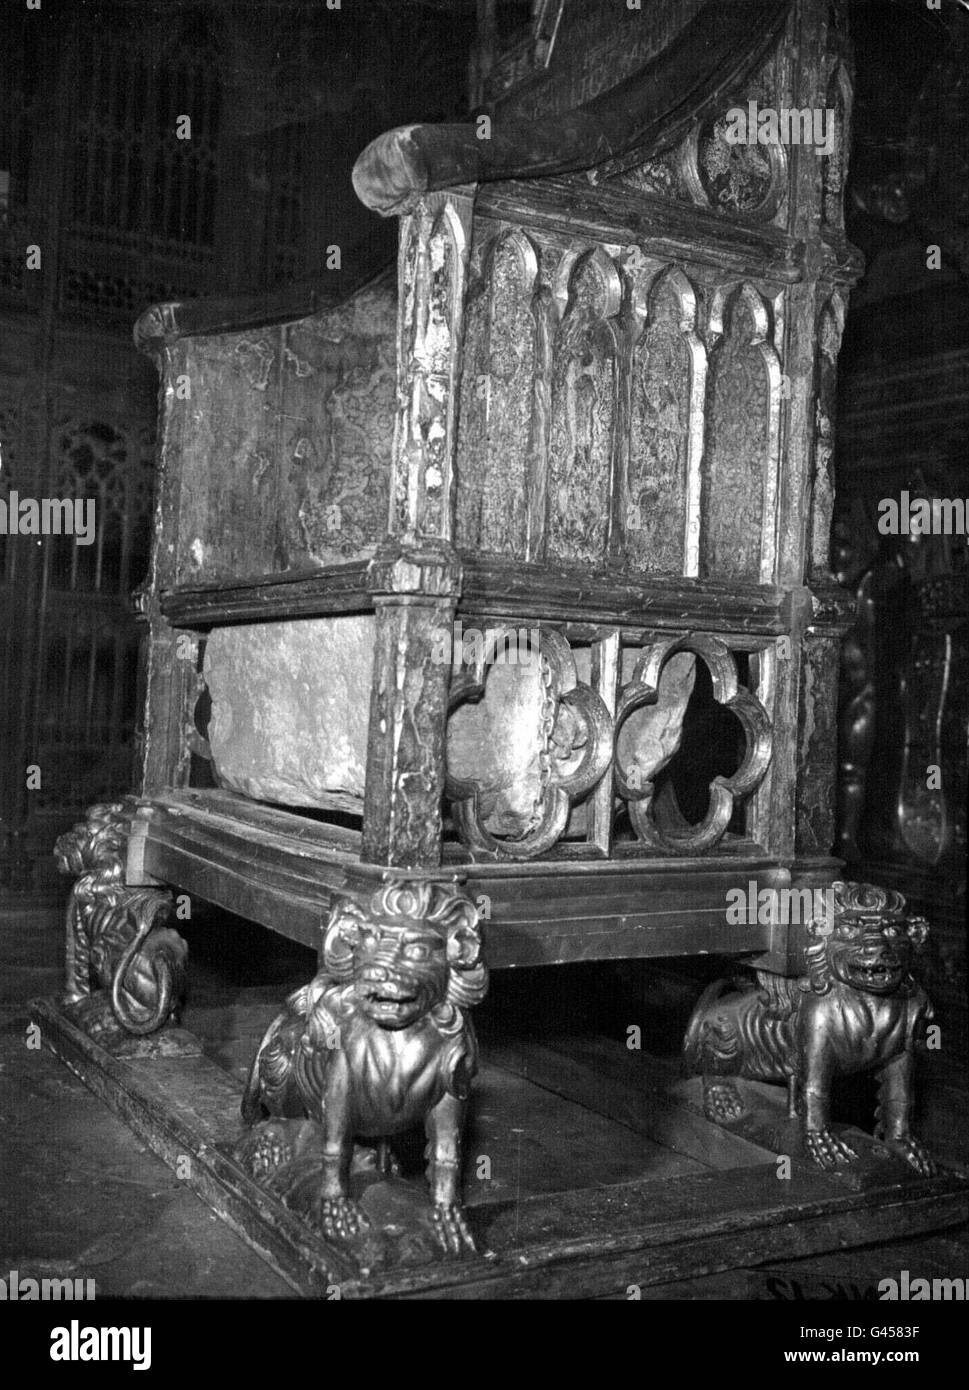 The ancient Stone of Scone beneath the Coronation Chair in Westminster Abbey, London. The stone had been finally restored to its original place after being stolen in the early hours of Christmas Day 1950. 3/7/96 The Prime Minister is expected to announce the return of the historic stone to Scotland after 700 years. Stock Photo